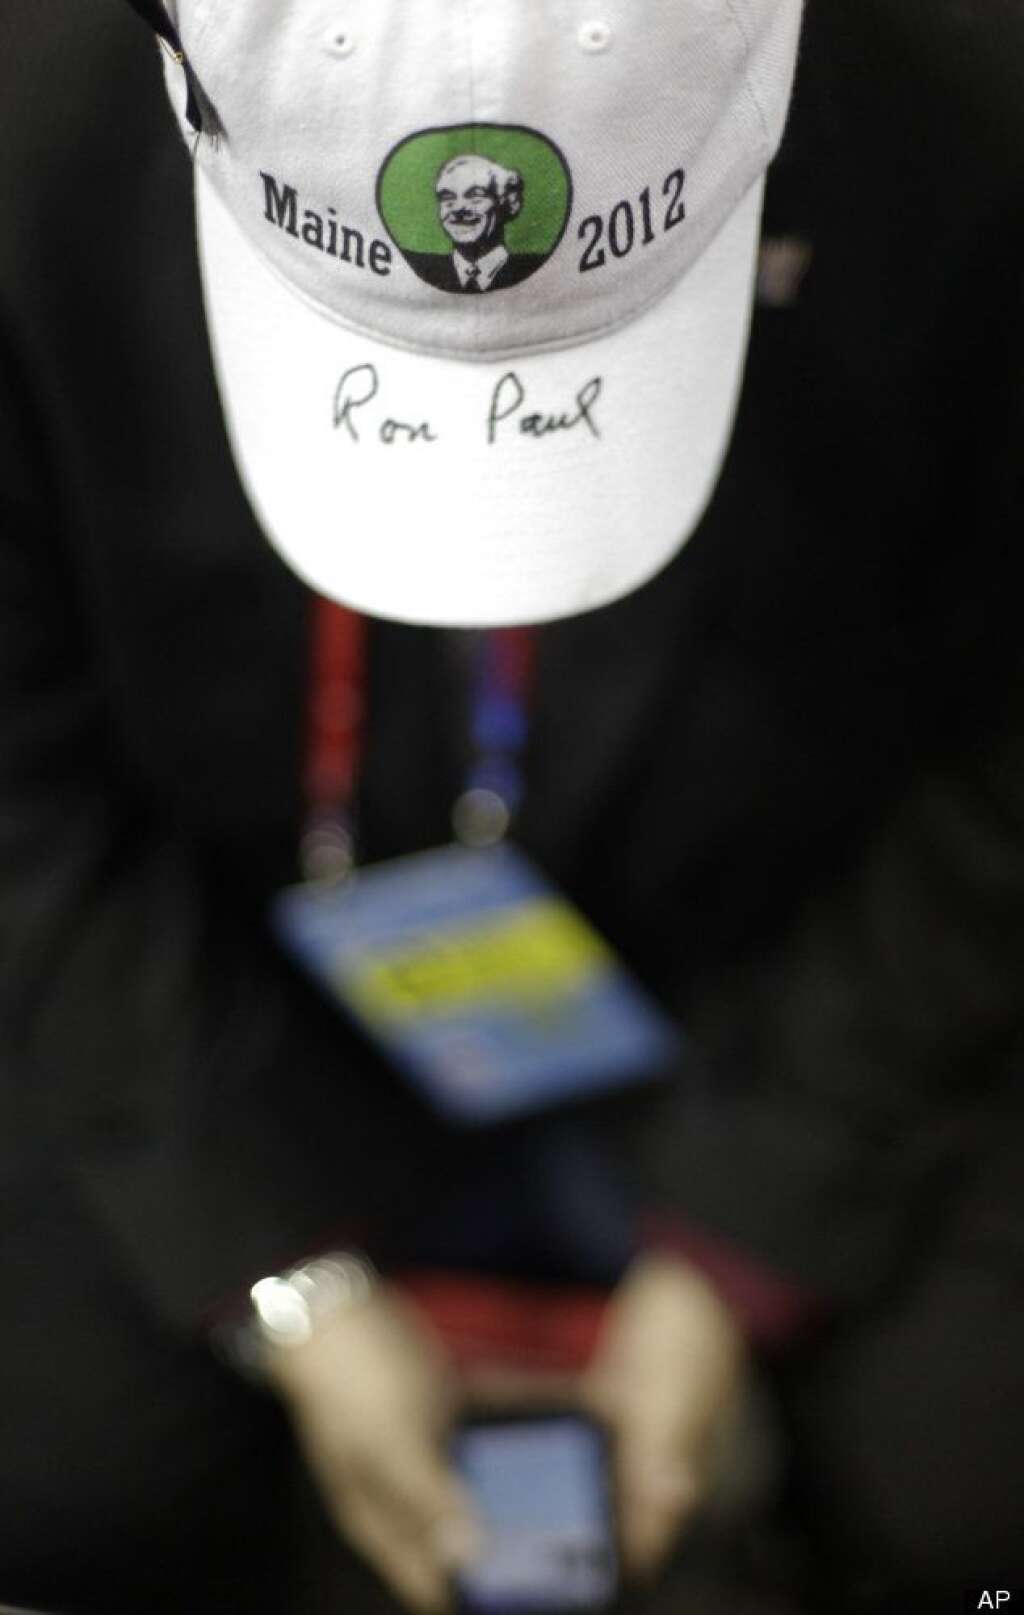 Bryan Daugherty - With Ron Paul's autograph on his hat, Maine delegate Bryan Daugherty from Bangor looks at his smart phone at the Republican National Convention in Tampa, Fla., on Tuesday, Aug. 28, 2012. (AP Photo/David Goldman)